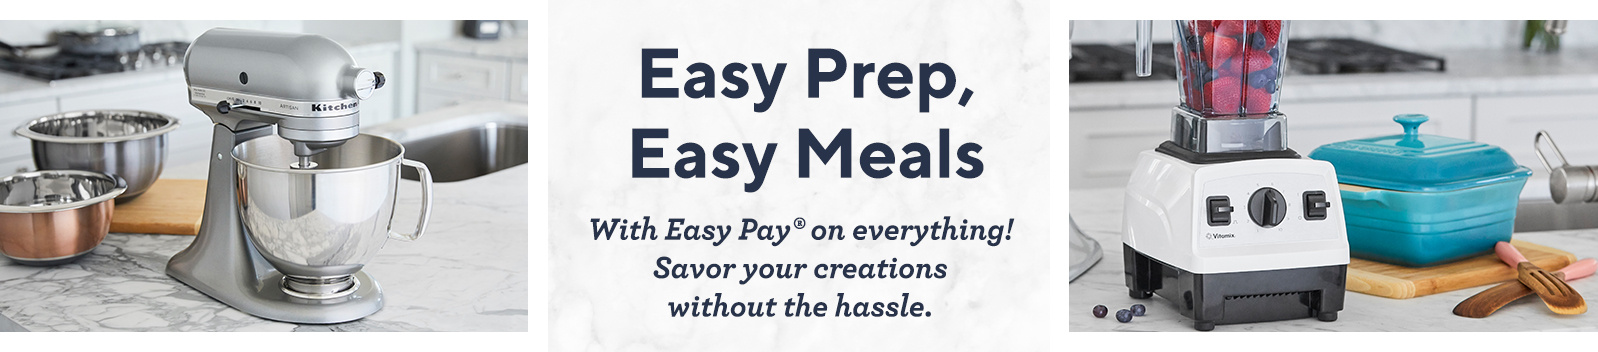 Easy Prep, Easy Meals  With Easy Pay® on everything! Savor your creations without the hassle.